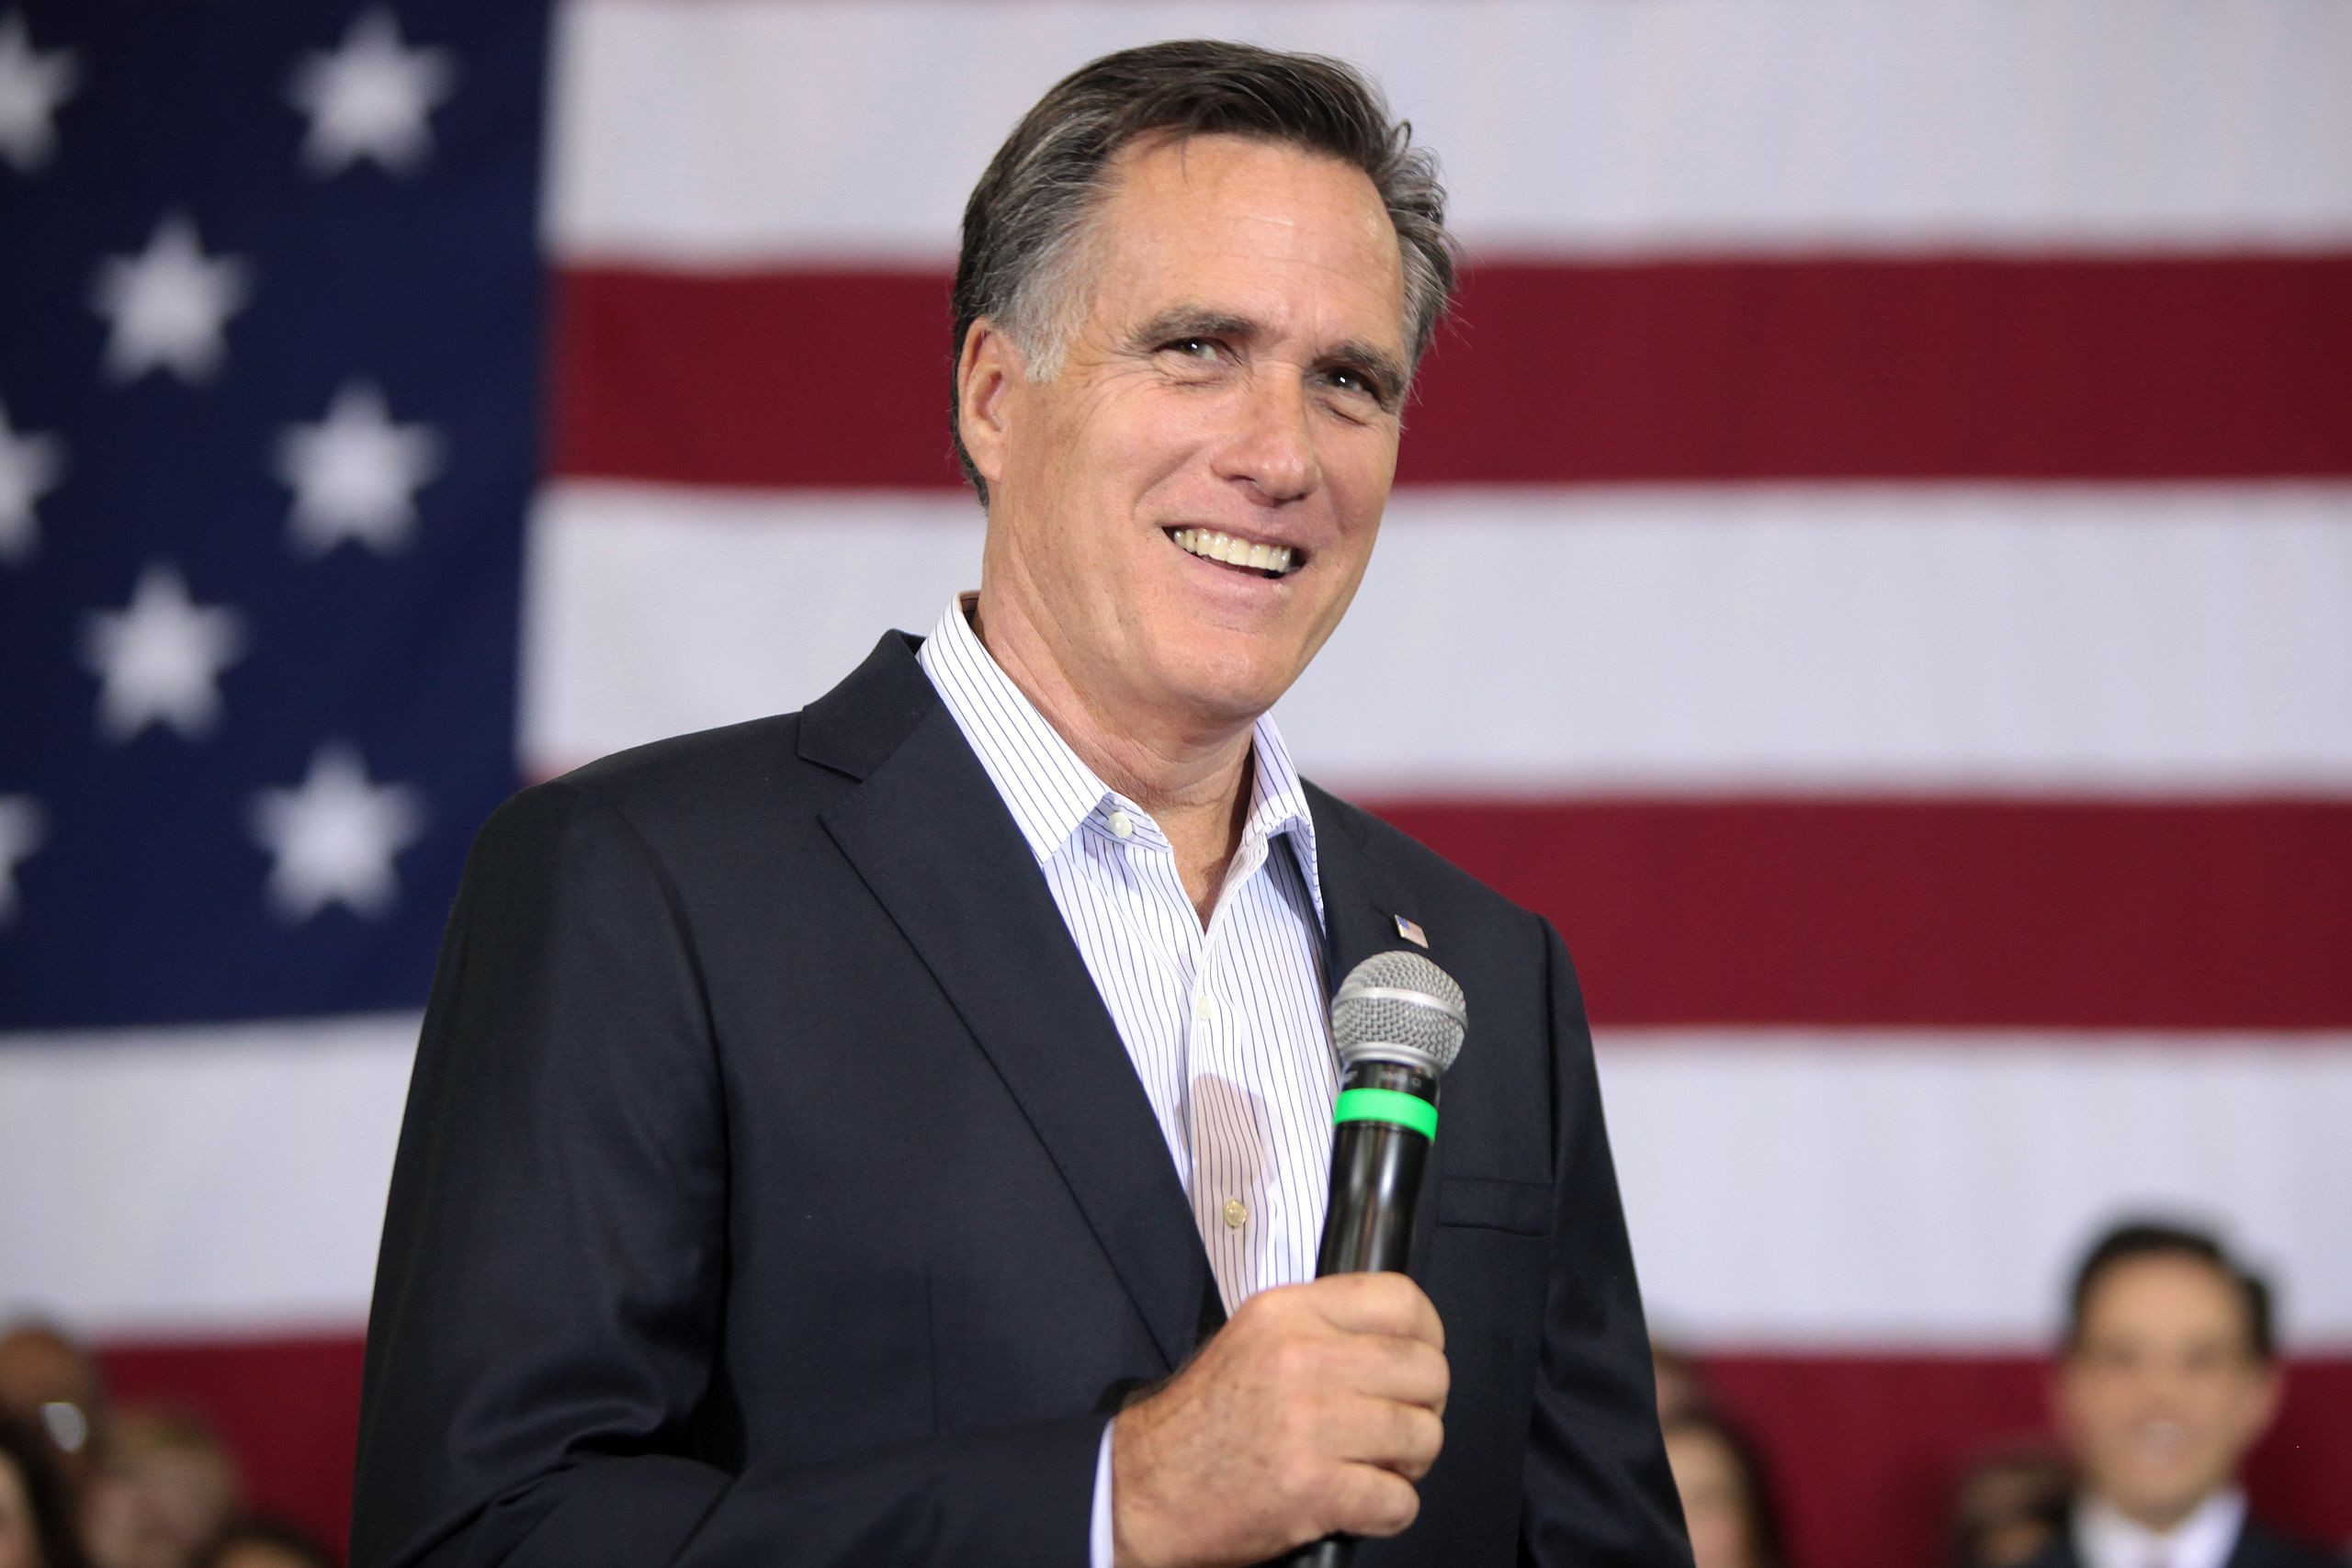 Romney Finally Makes It Official | Buzz Blog